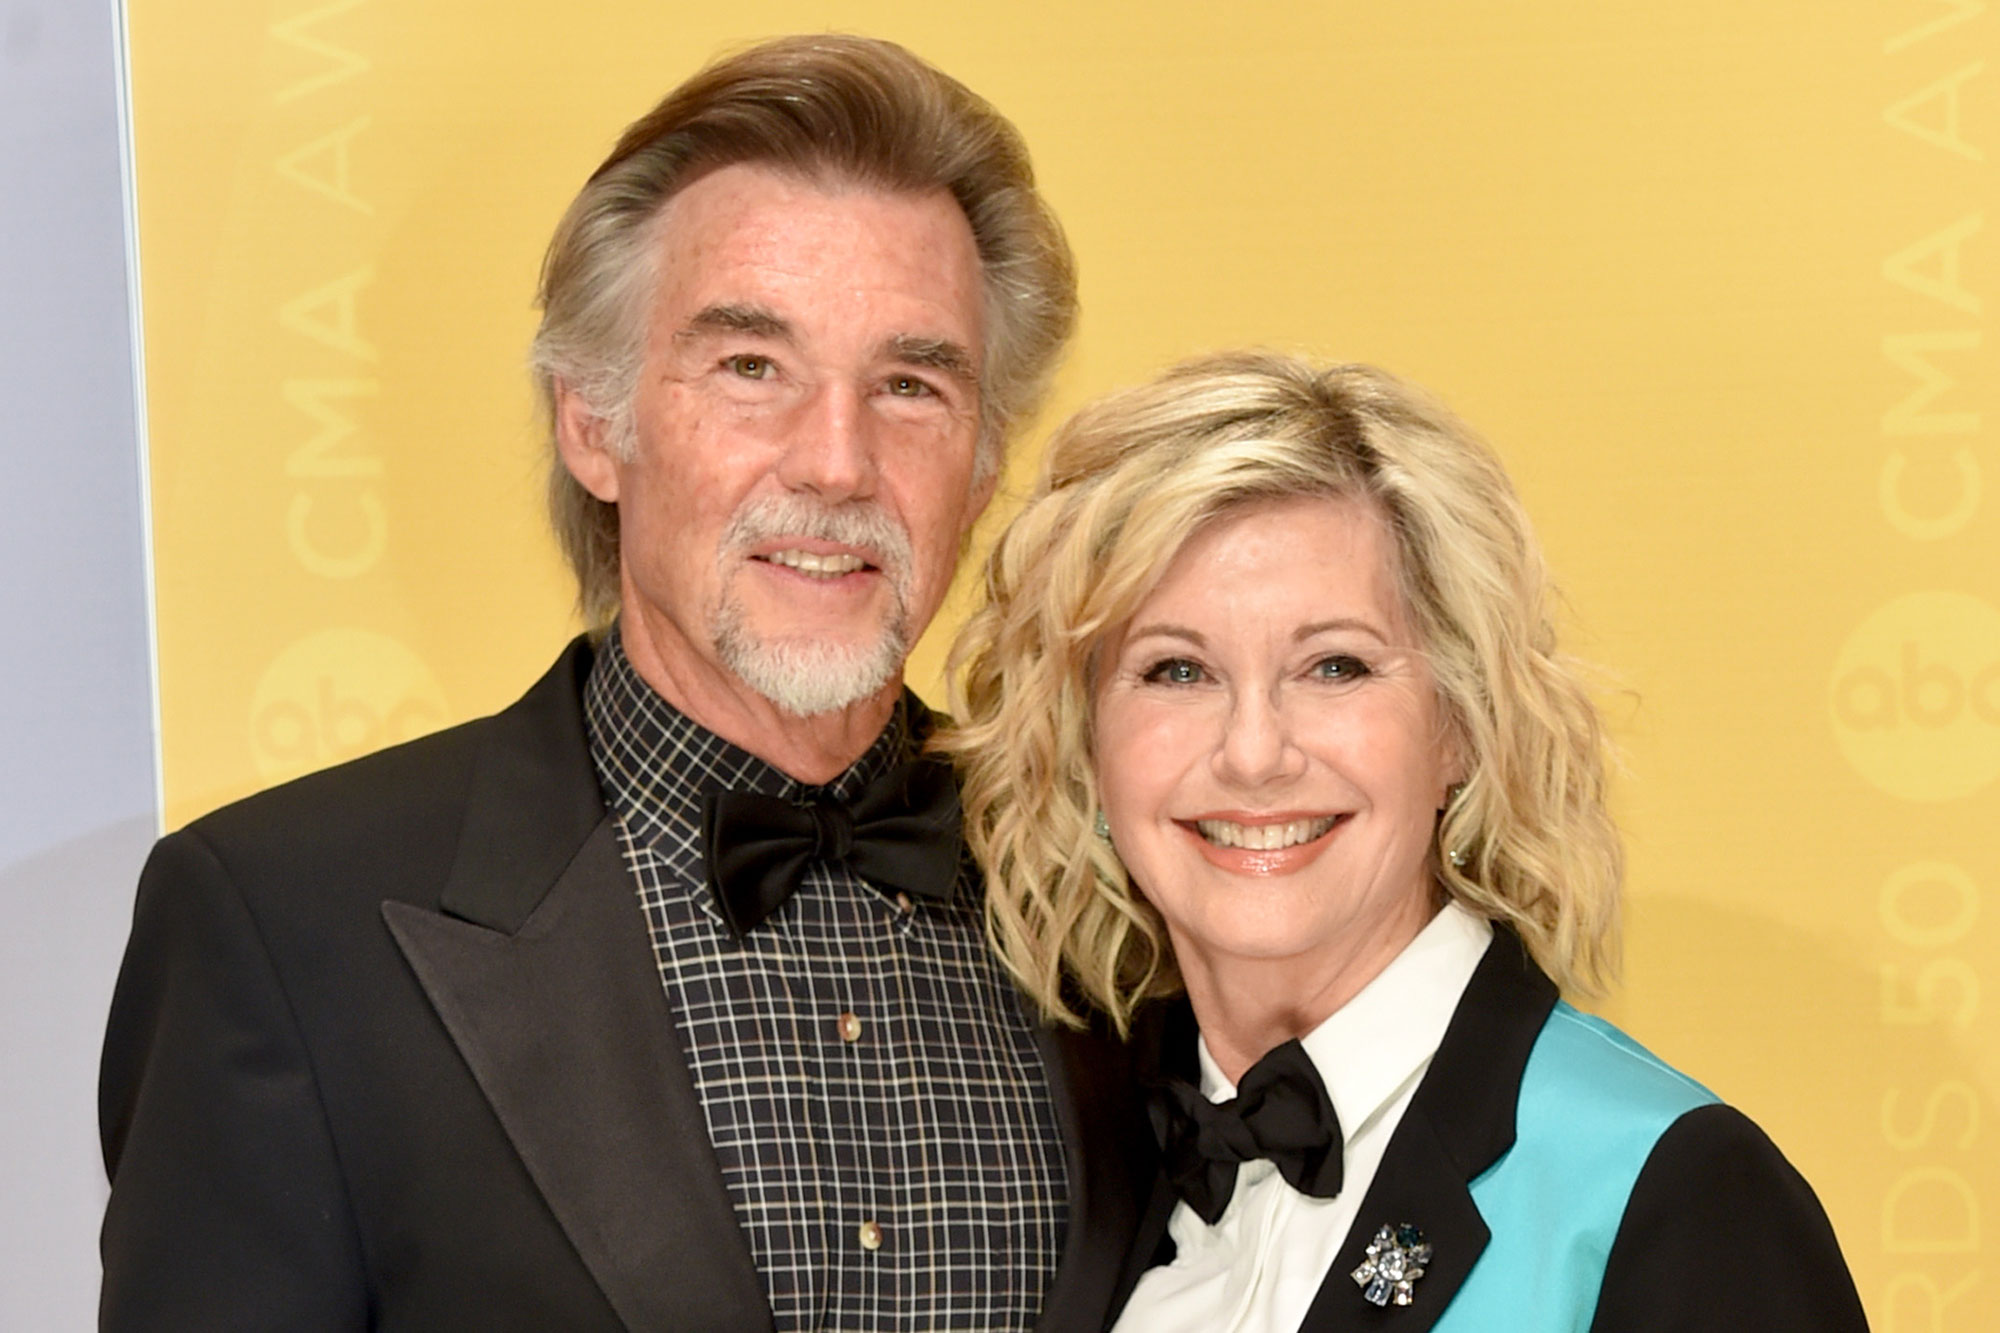 Olivia Newton-John's husband pays tribute to late star: 'She was the most courageous woman I've ever known'